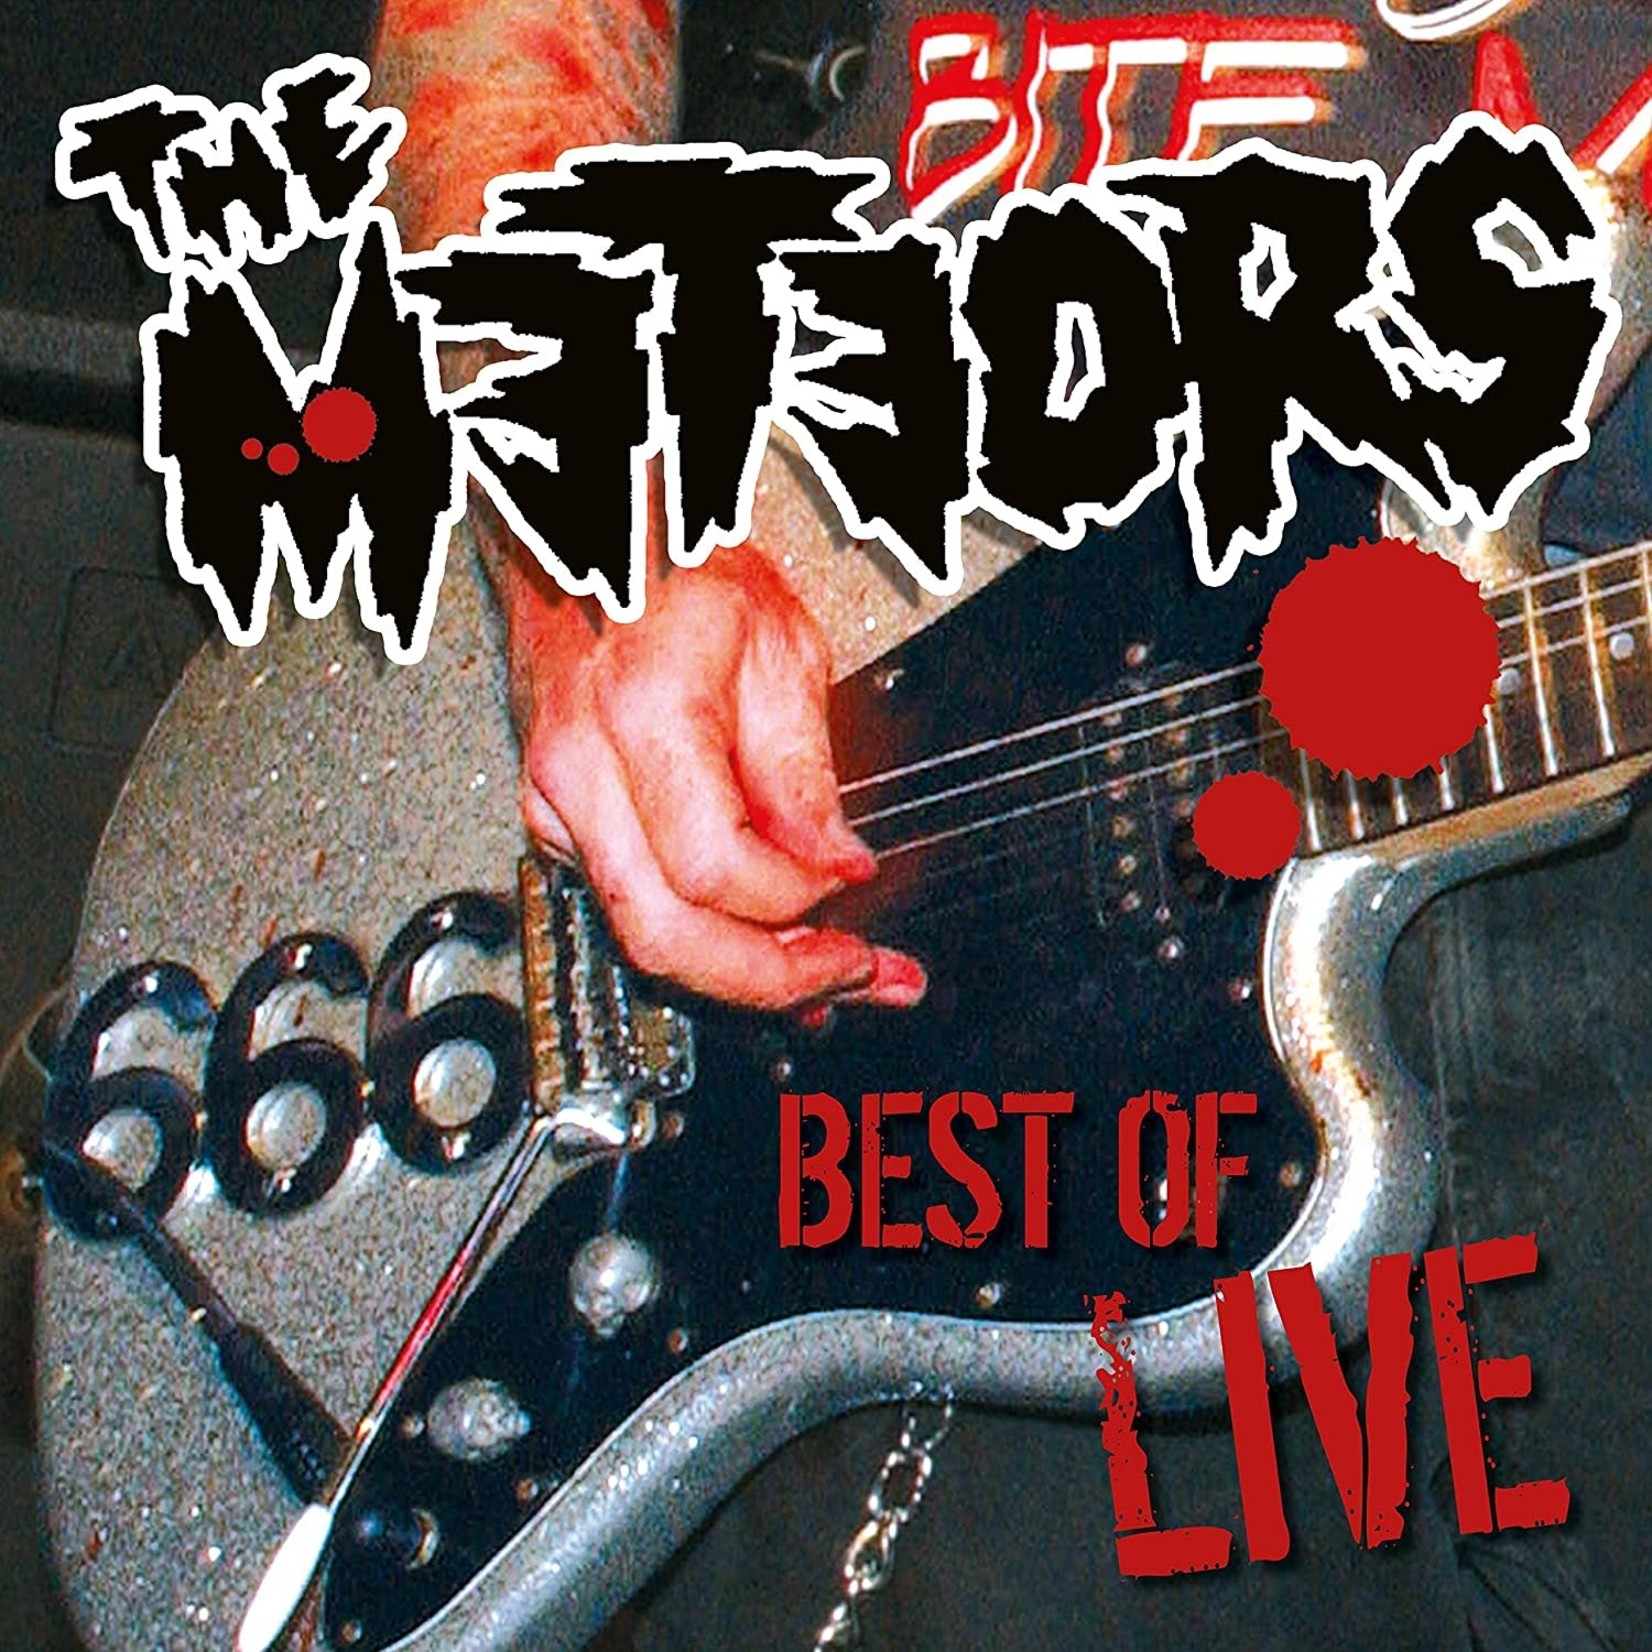 THE METEORS BEST OF LIVE  LP